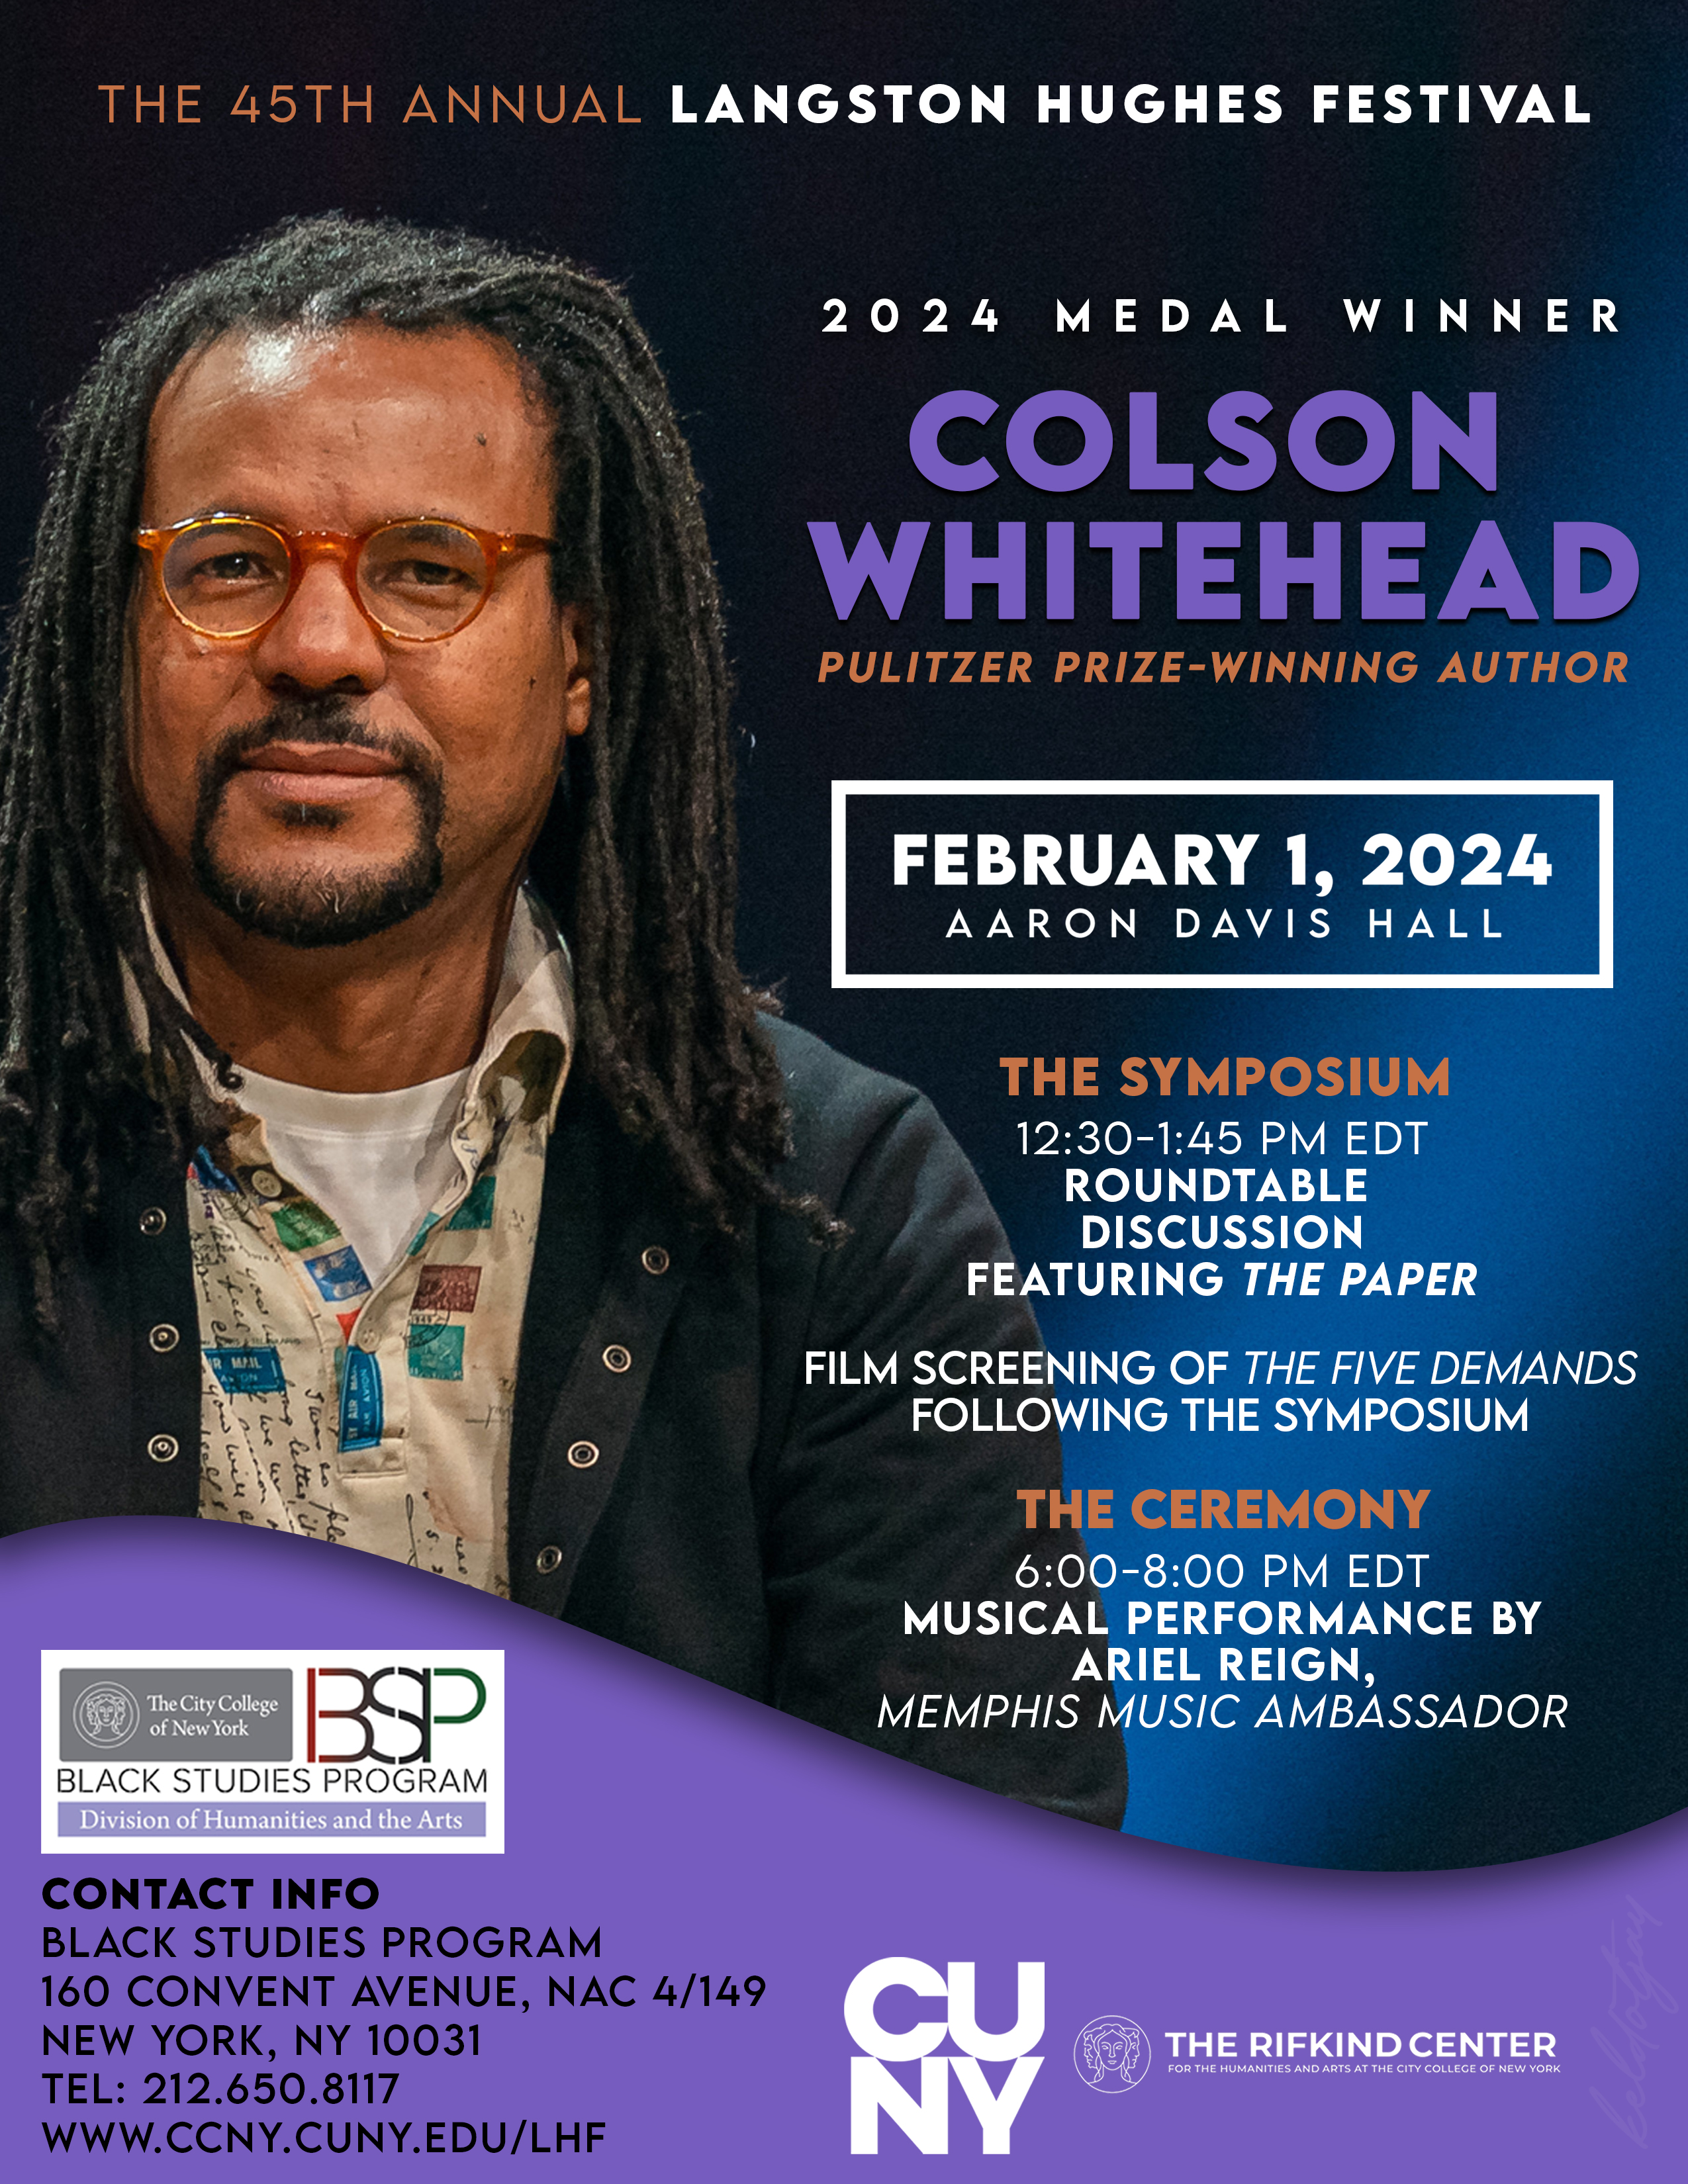 Event poster feat. honoree Colson Whitehead and event details